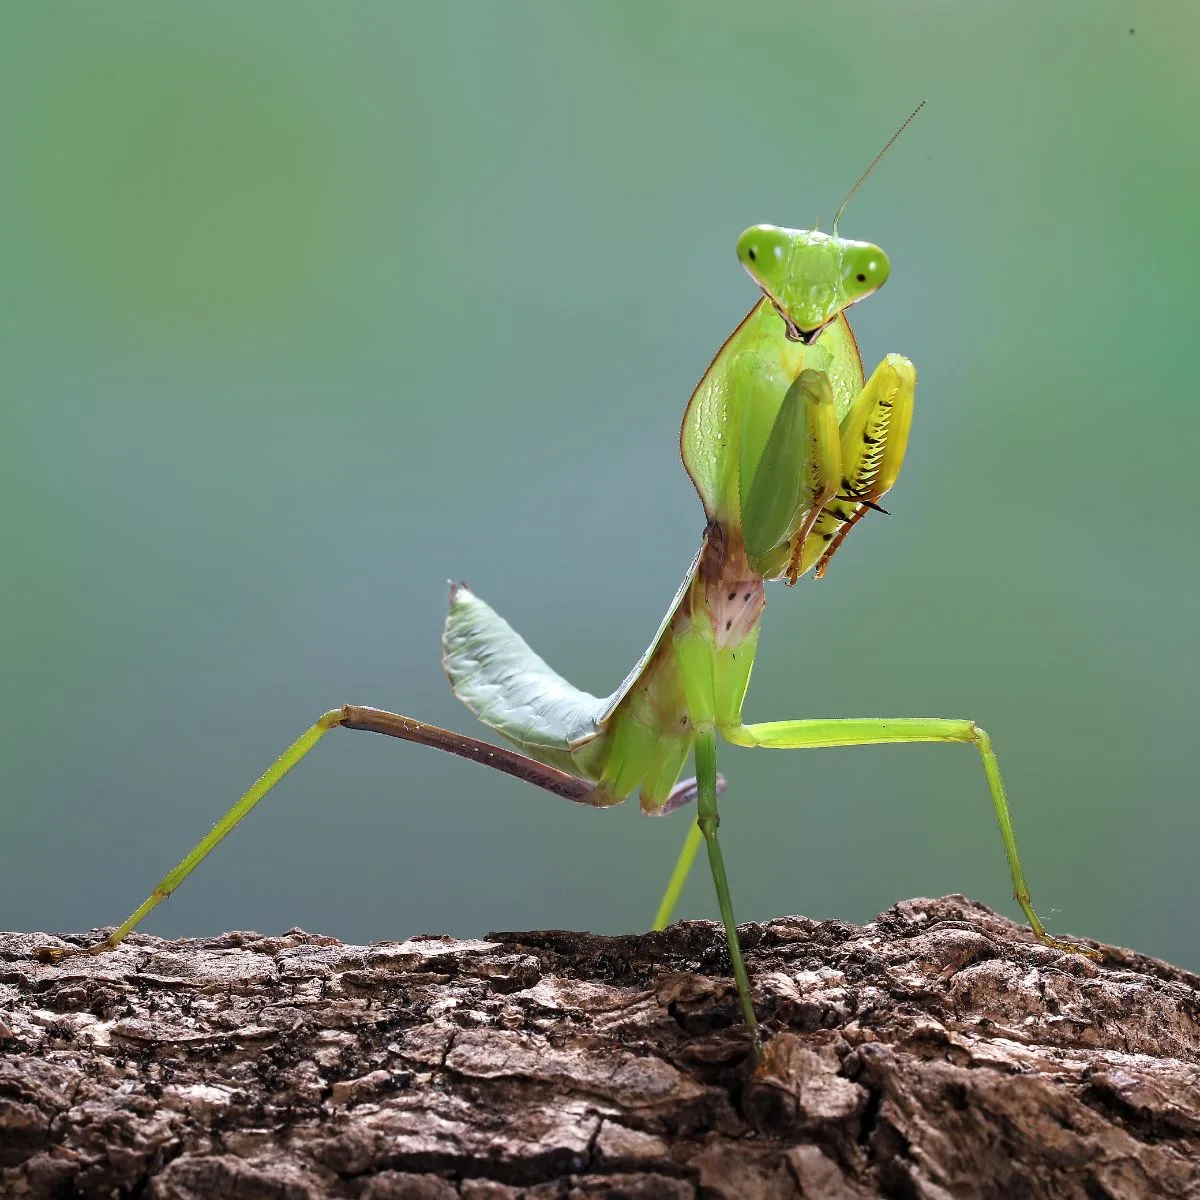 Significance of a Dead Praying Mantis in the Bible